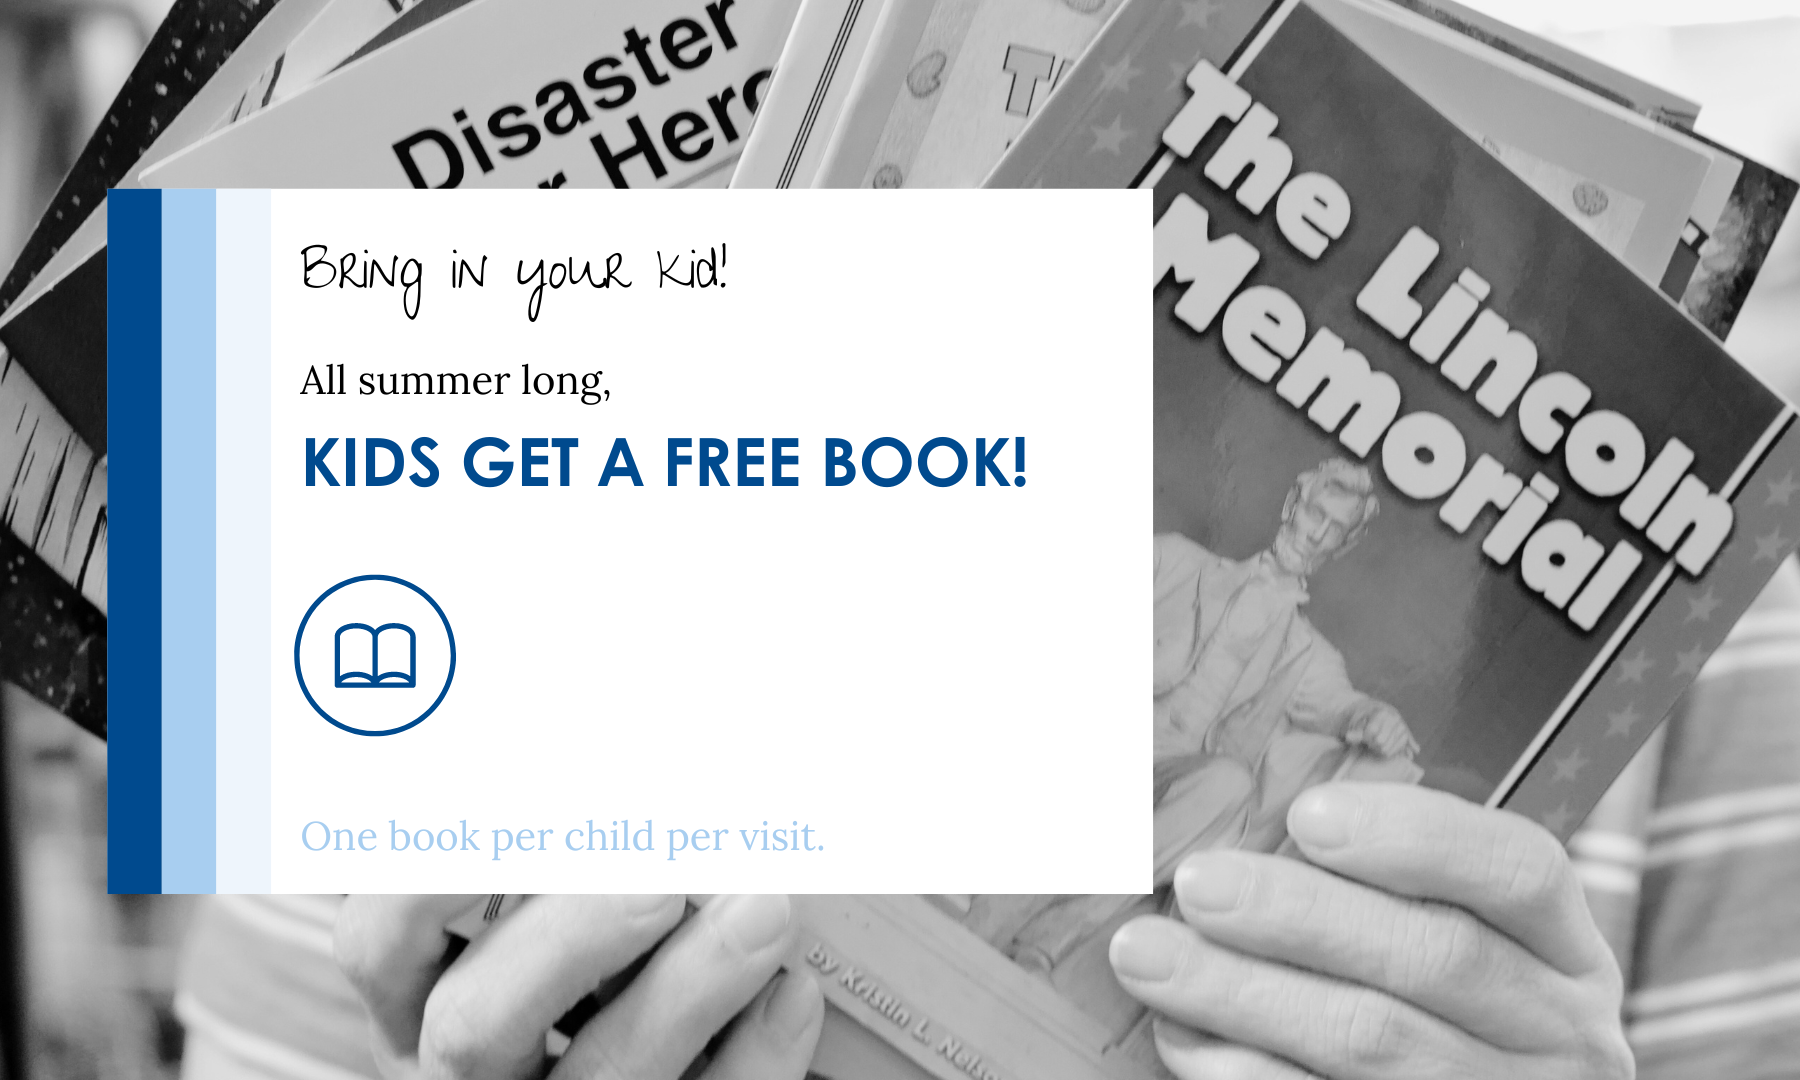 Kids get a free book at New 2 You